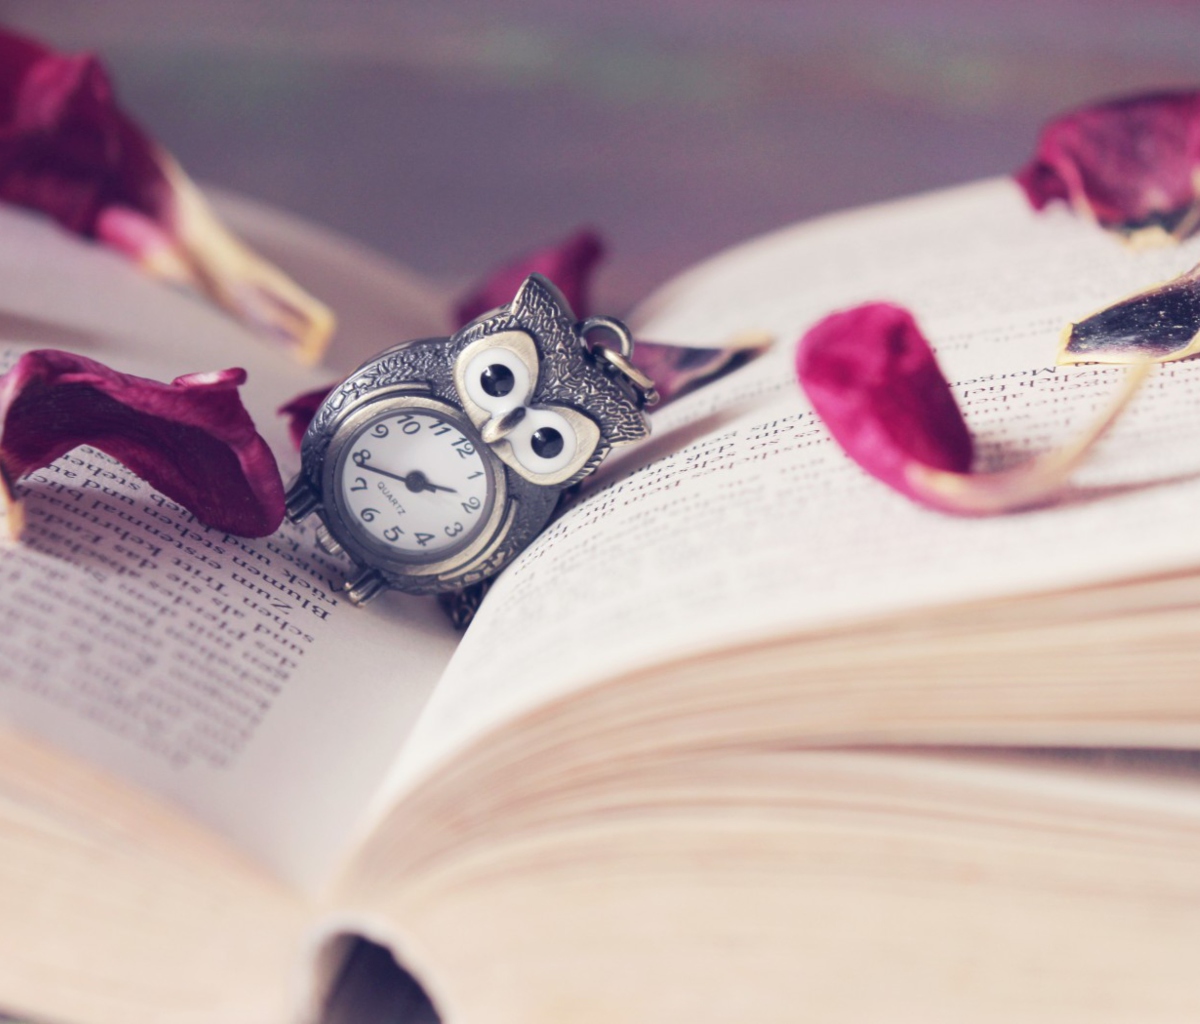 Vintage Owl Watch And Book wallpaper 1200x1024